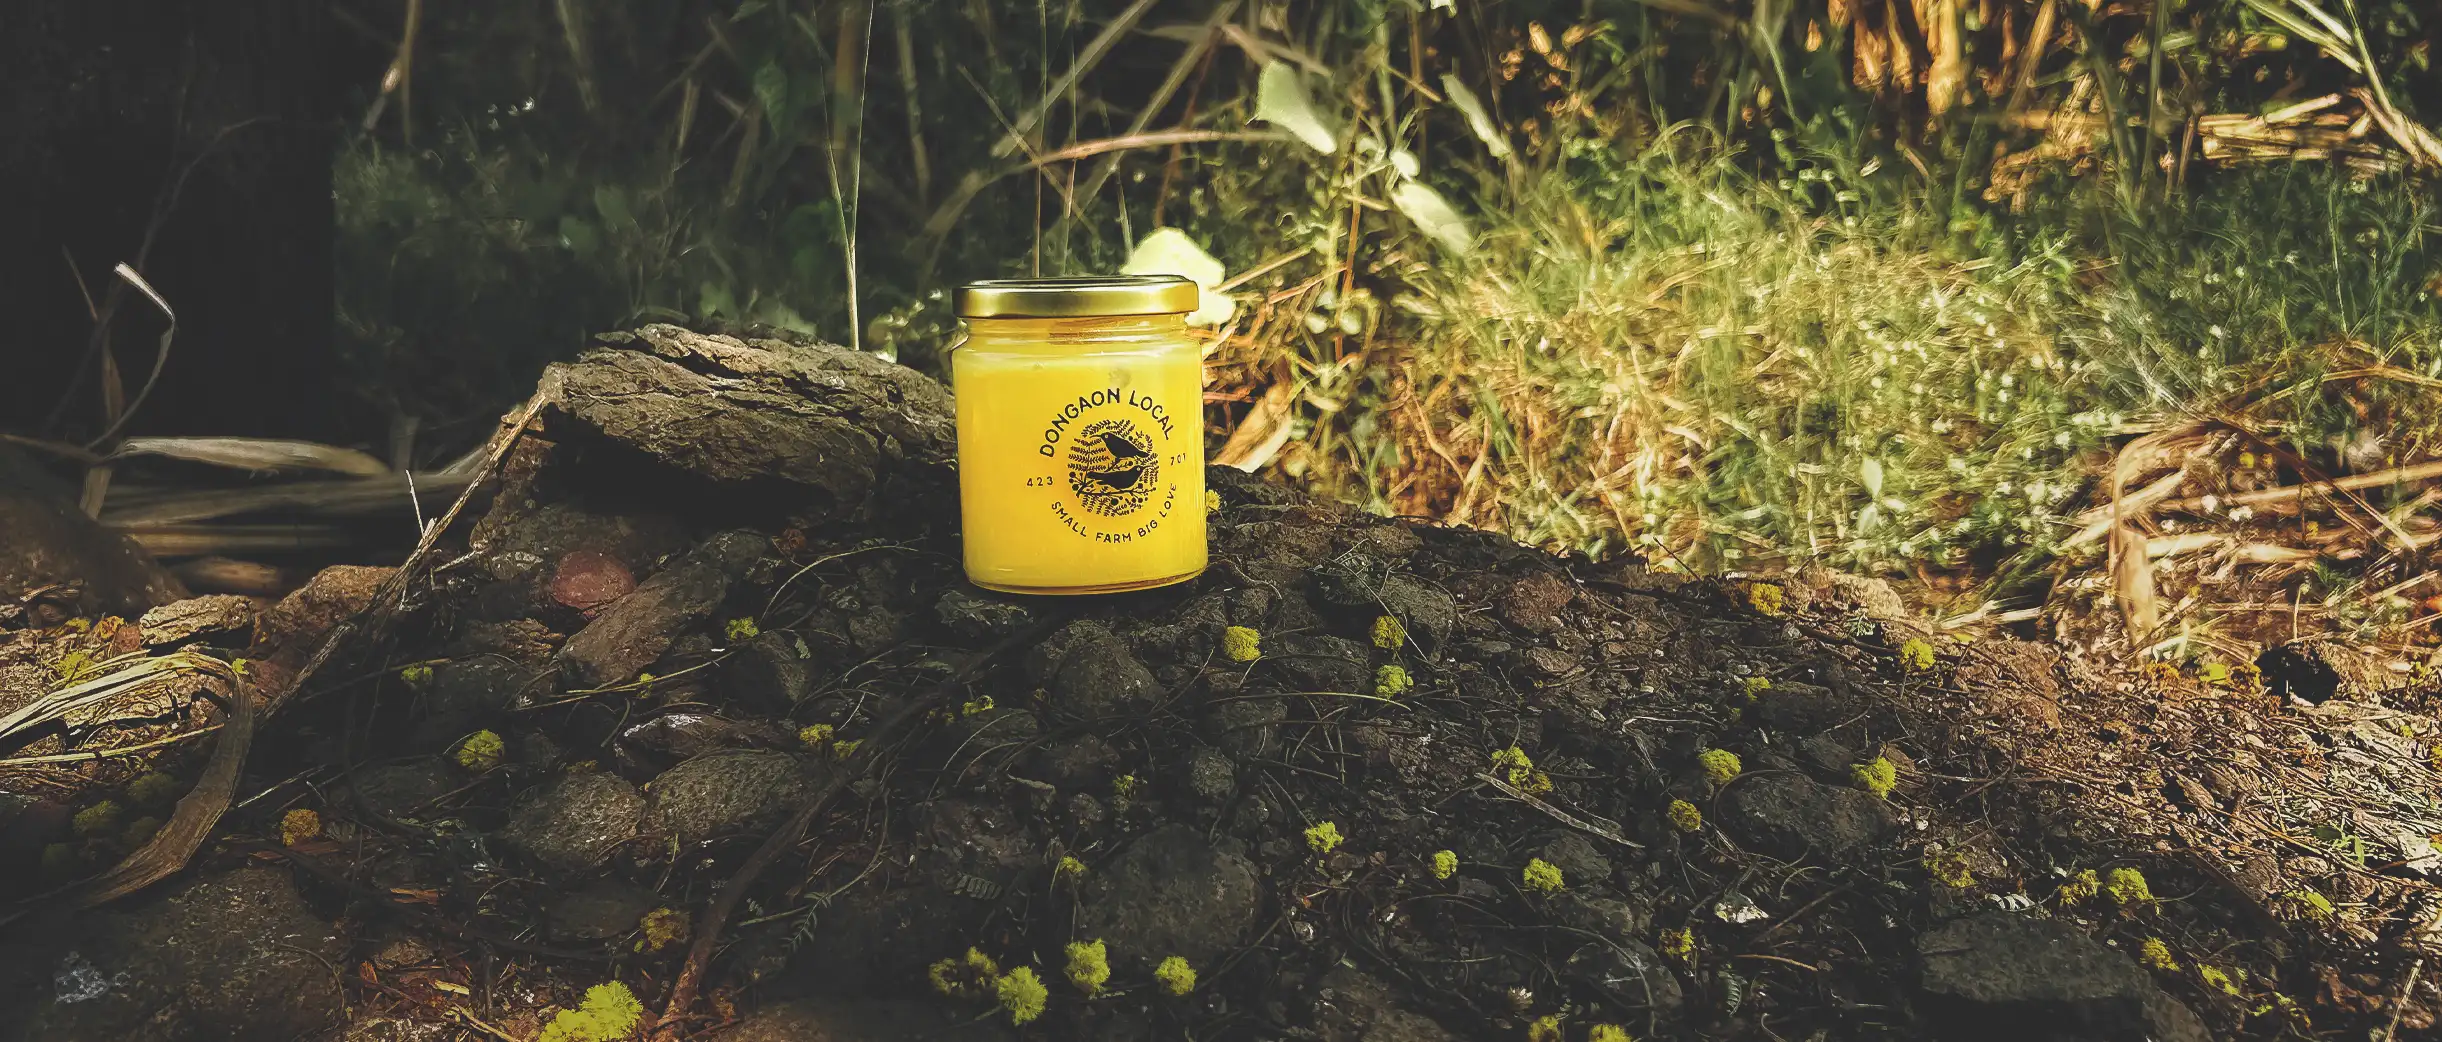 Dongaon Local is a hyperlocal ghee brand made in Maharashtra by a community of women